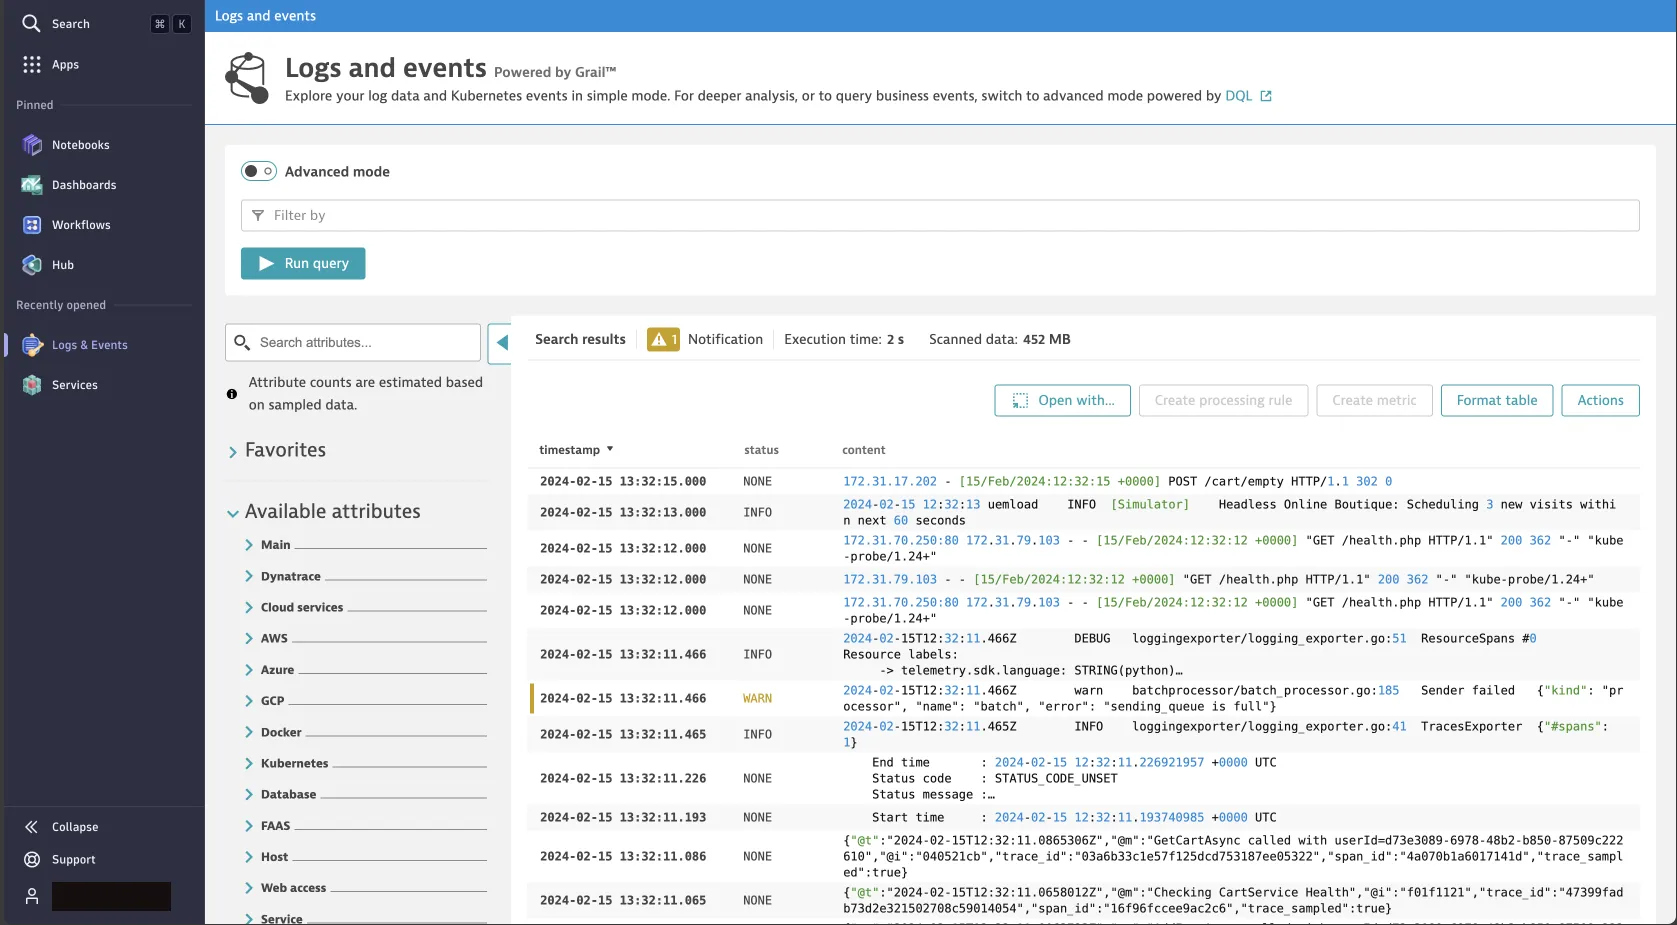 Log management in Dynatrace